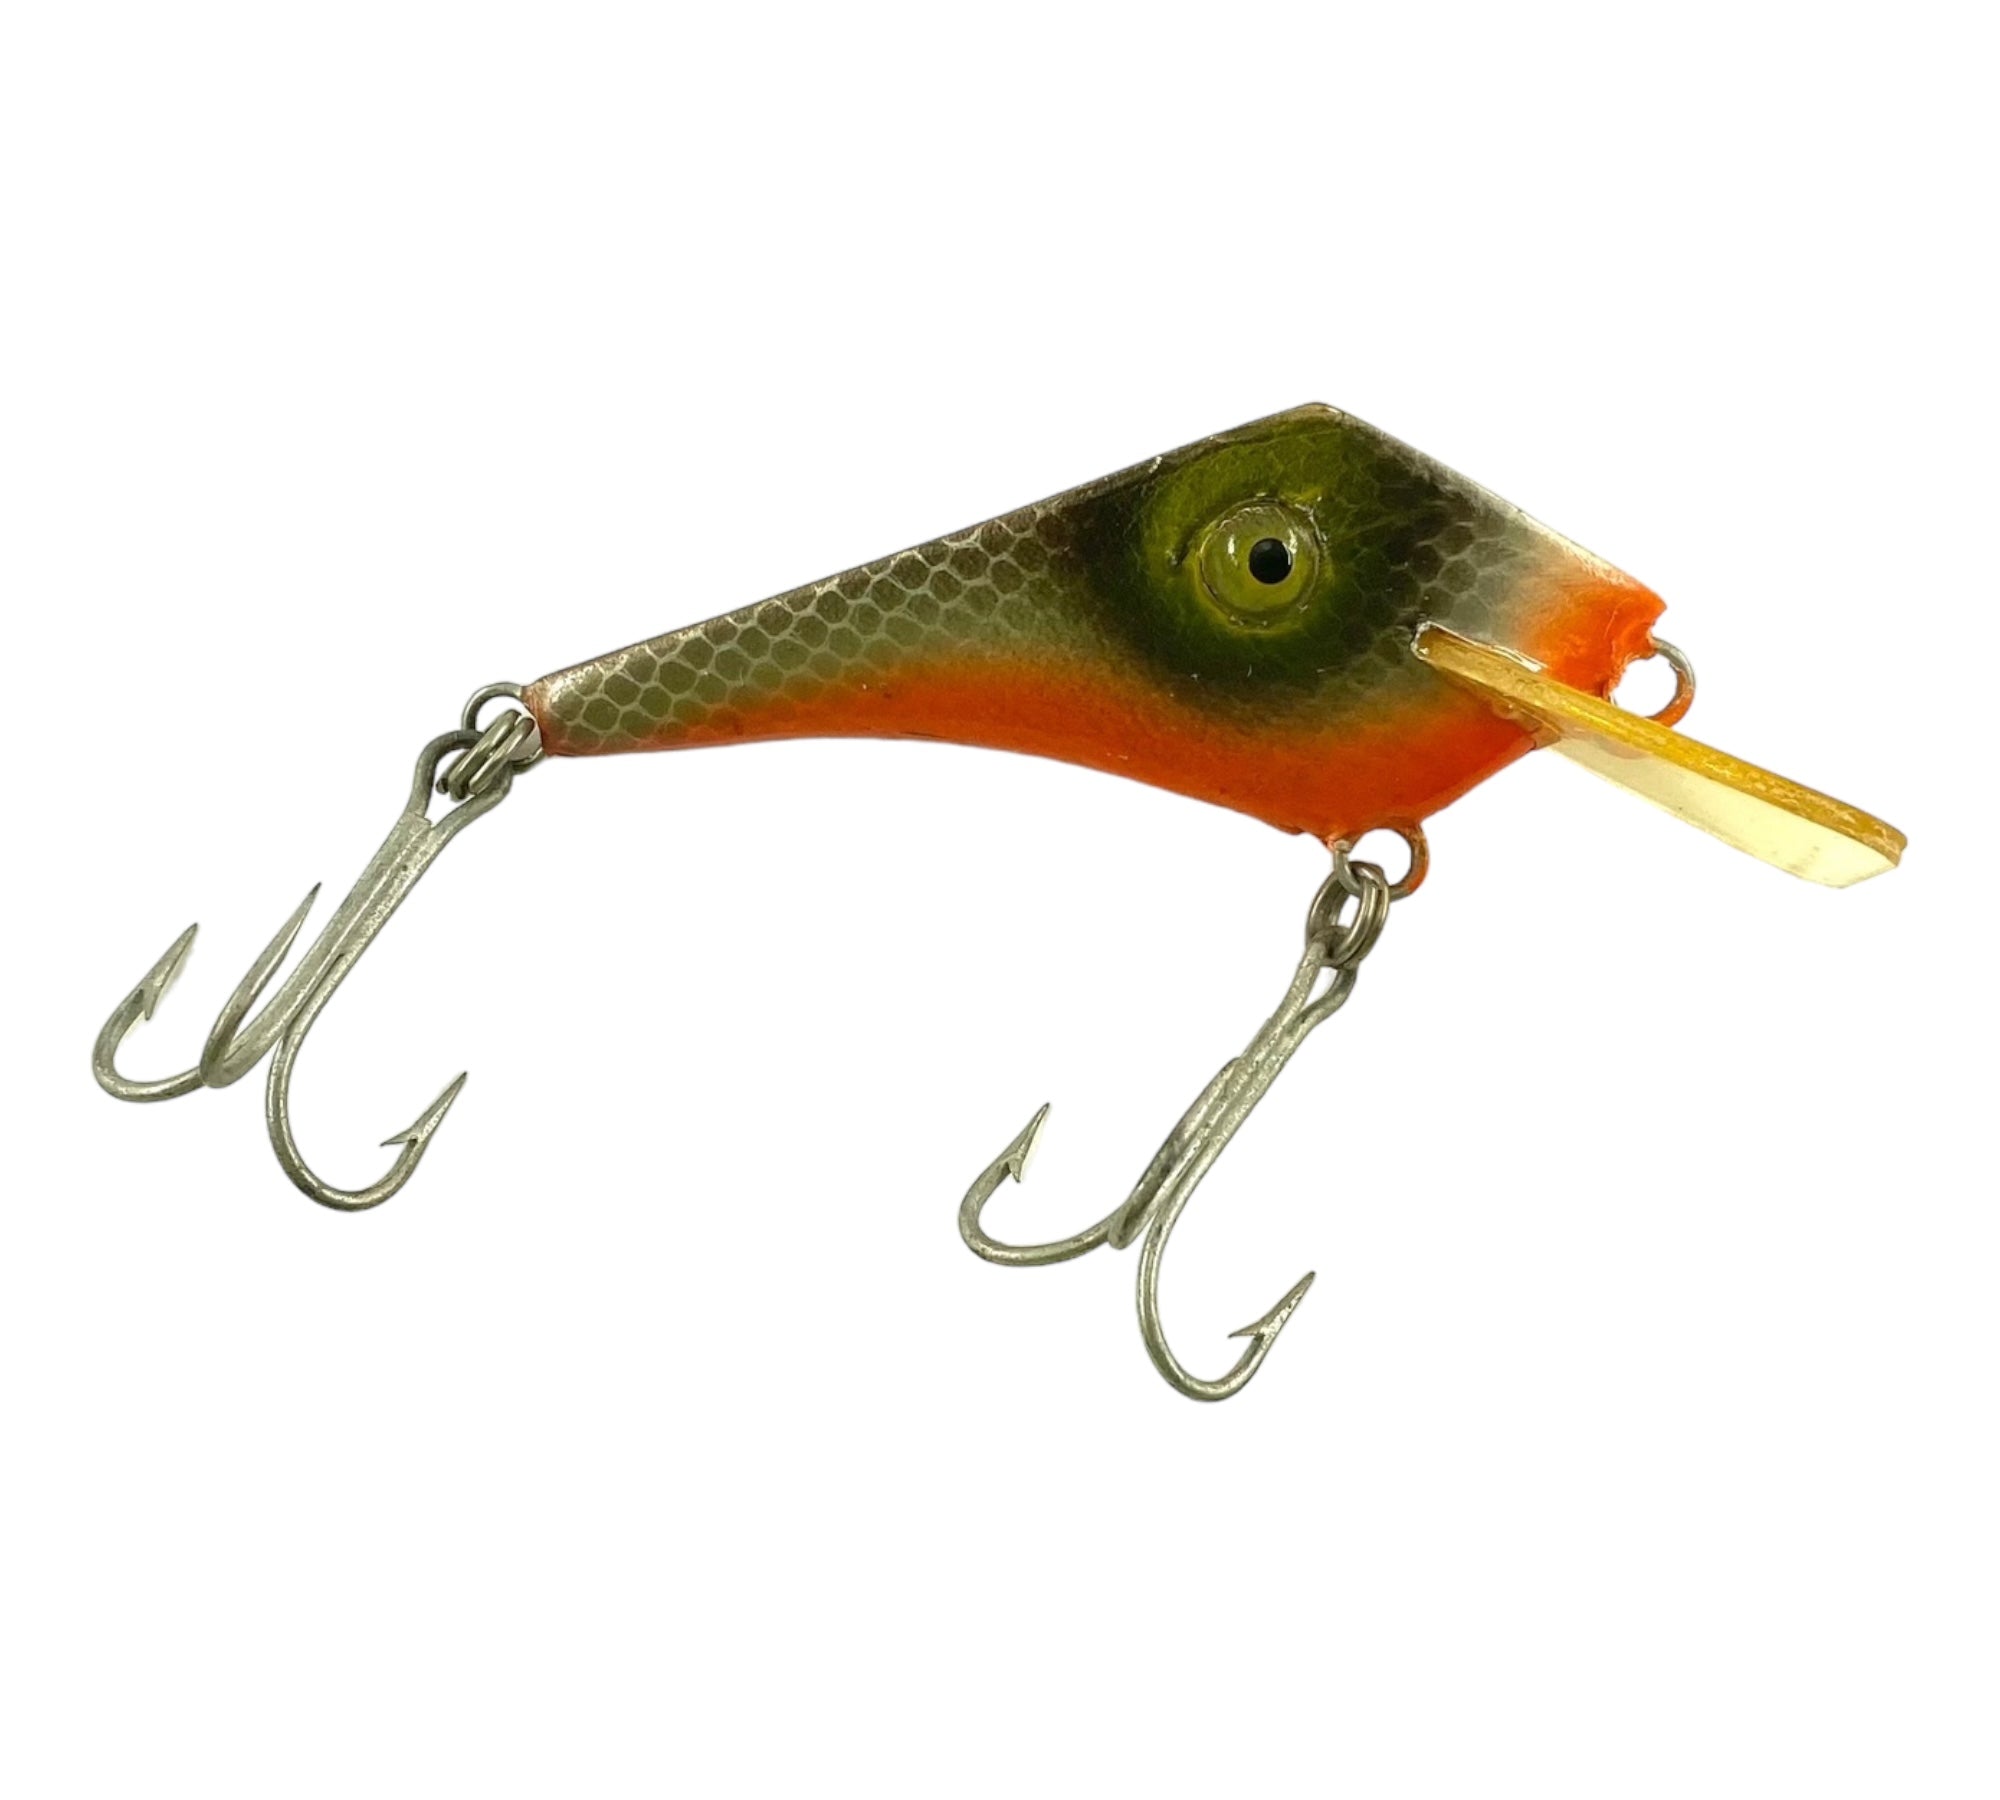 BUTCH HARRIS PROFESSIONAL BASS LURES FAS-BAK Fishing Lure – Toad